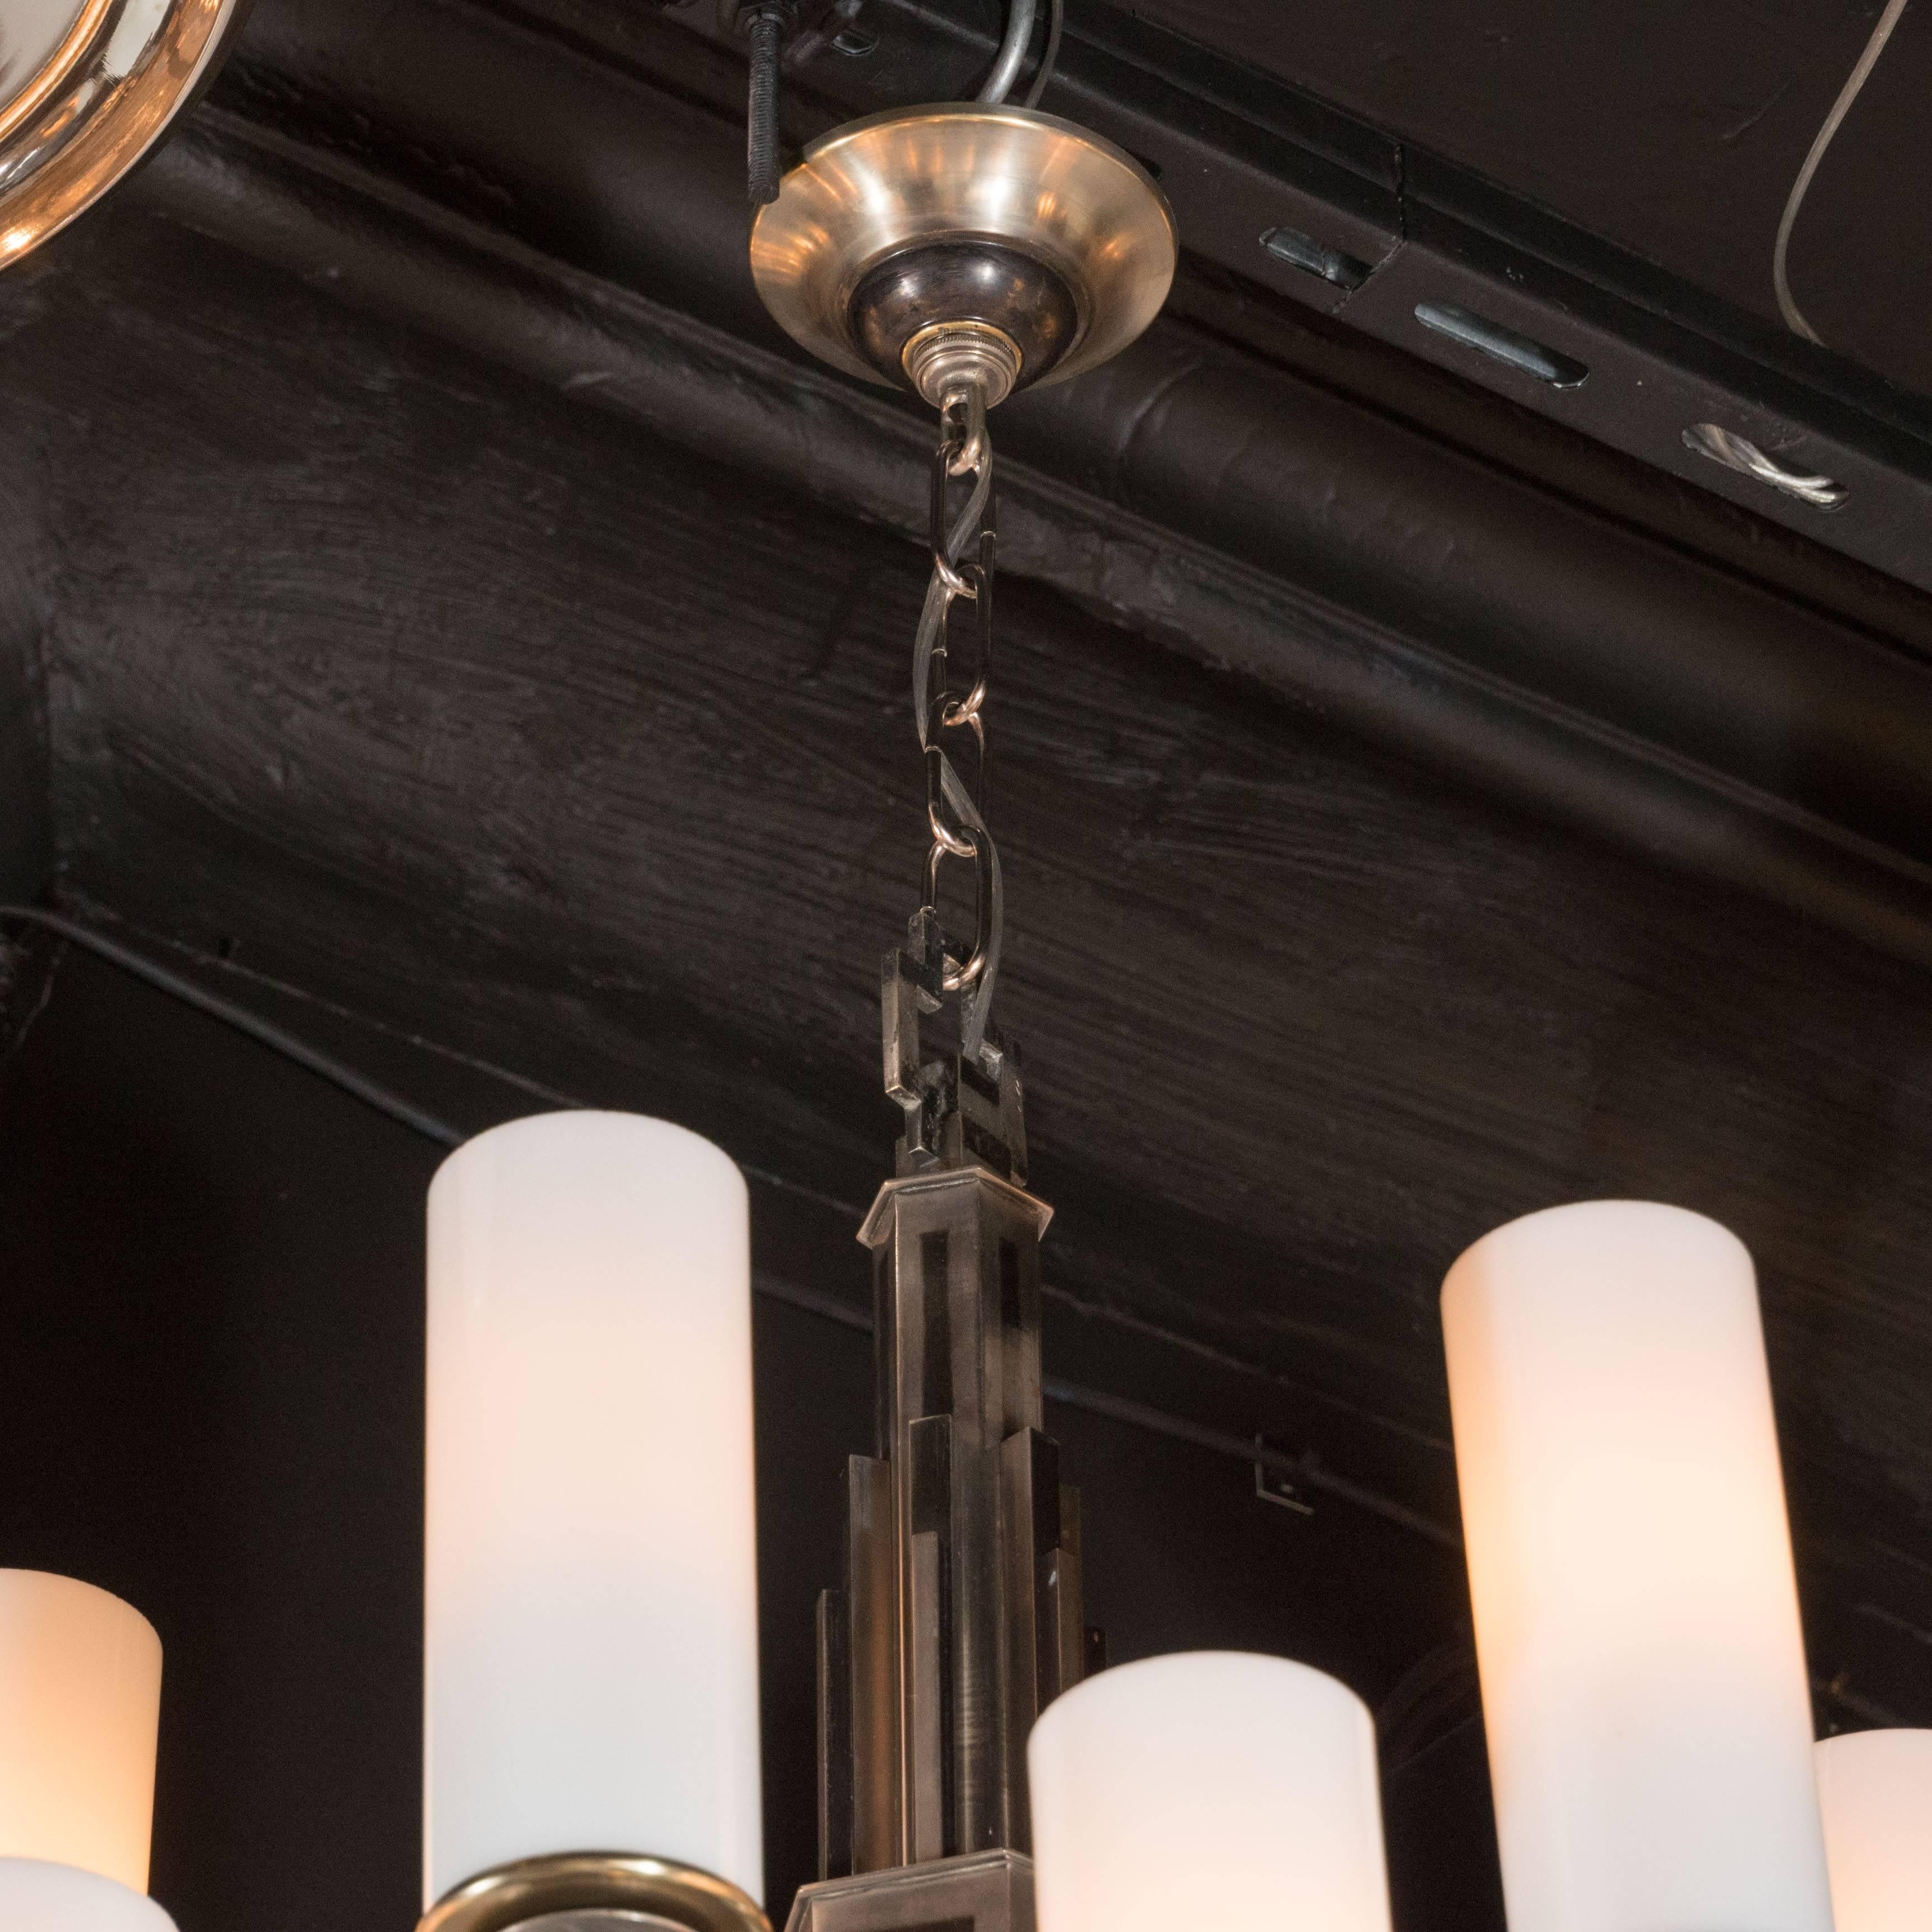 An exceptional Art Deco Machine Age chandelier, it consists of two tiers, each with six square tubular arms extending from an elaborate skyscraper style stem, each arm ends with a vertical cylindrical frosted glass shade with a brushed brass base.